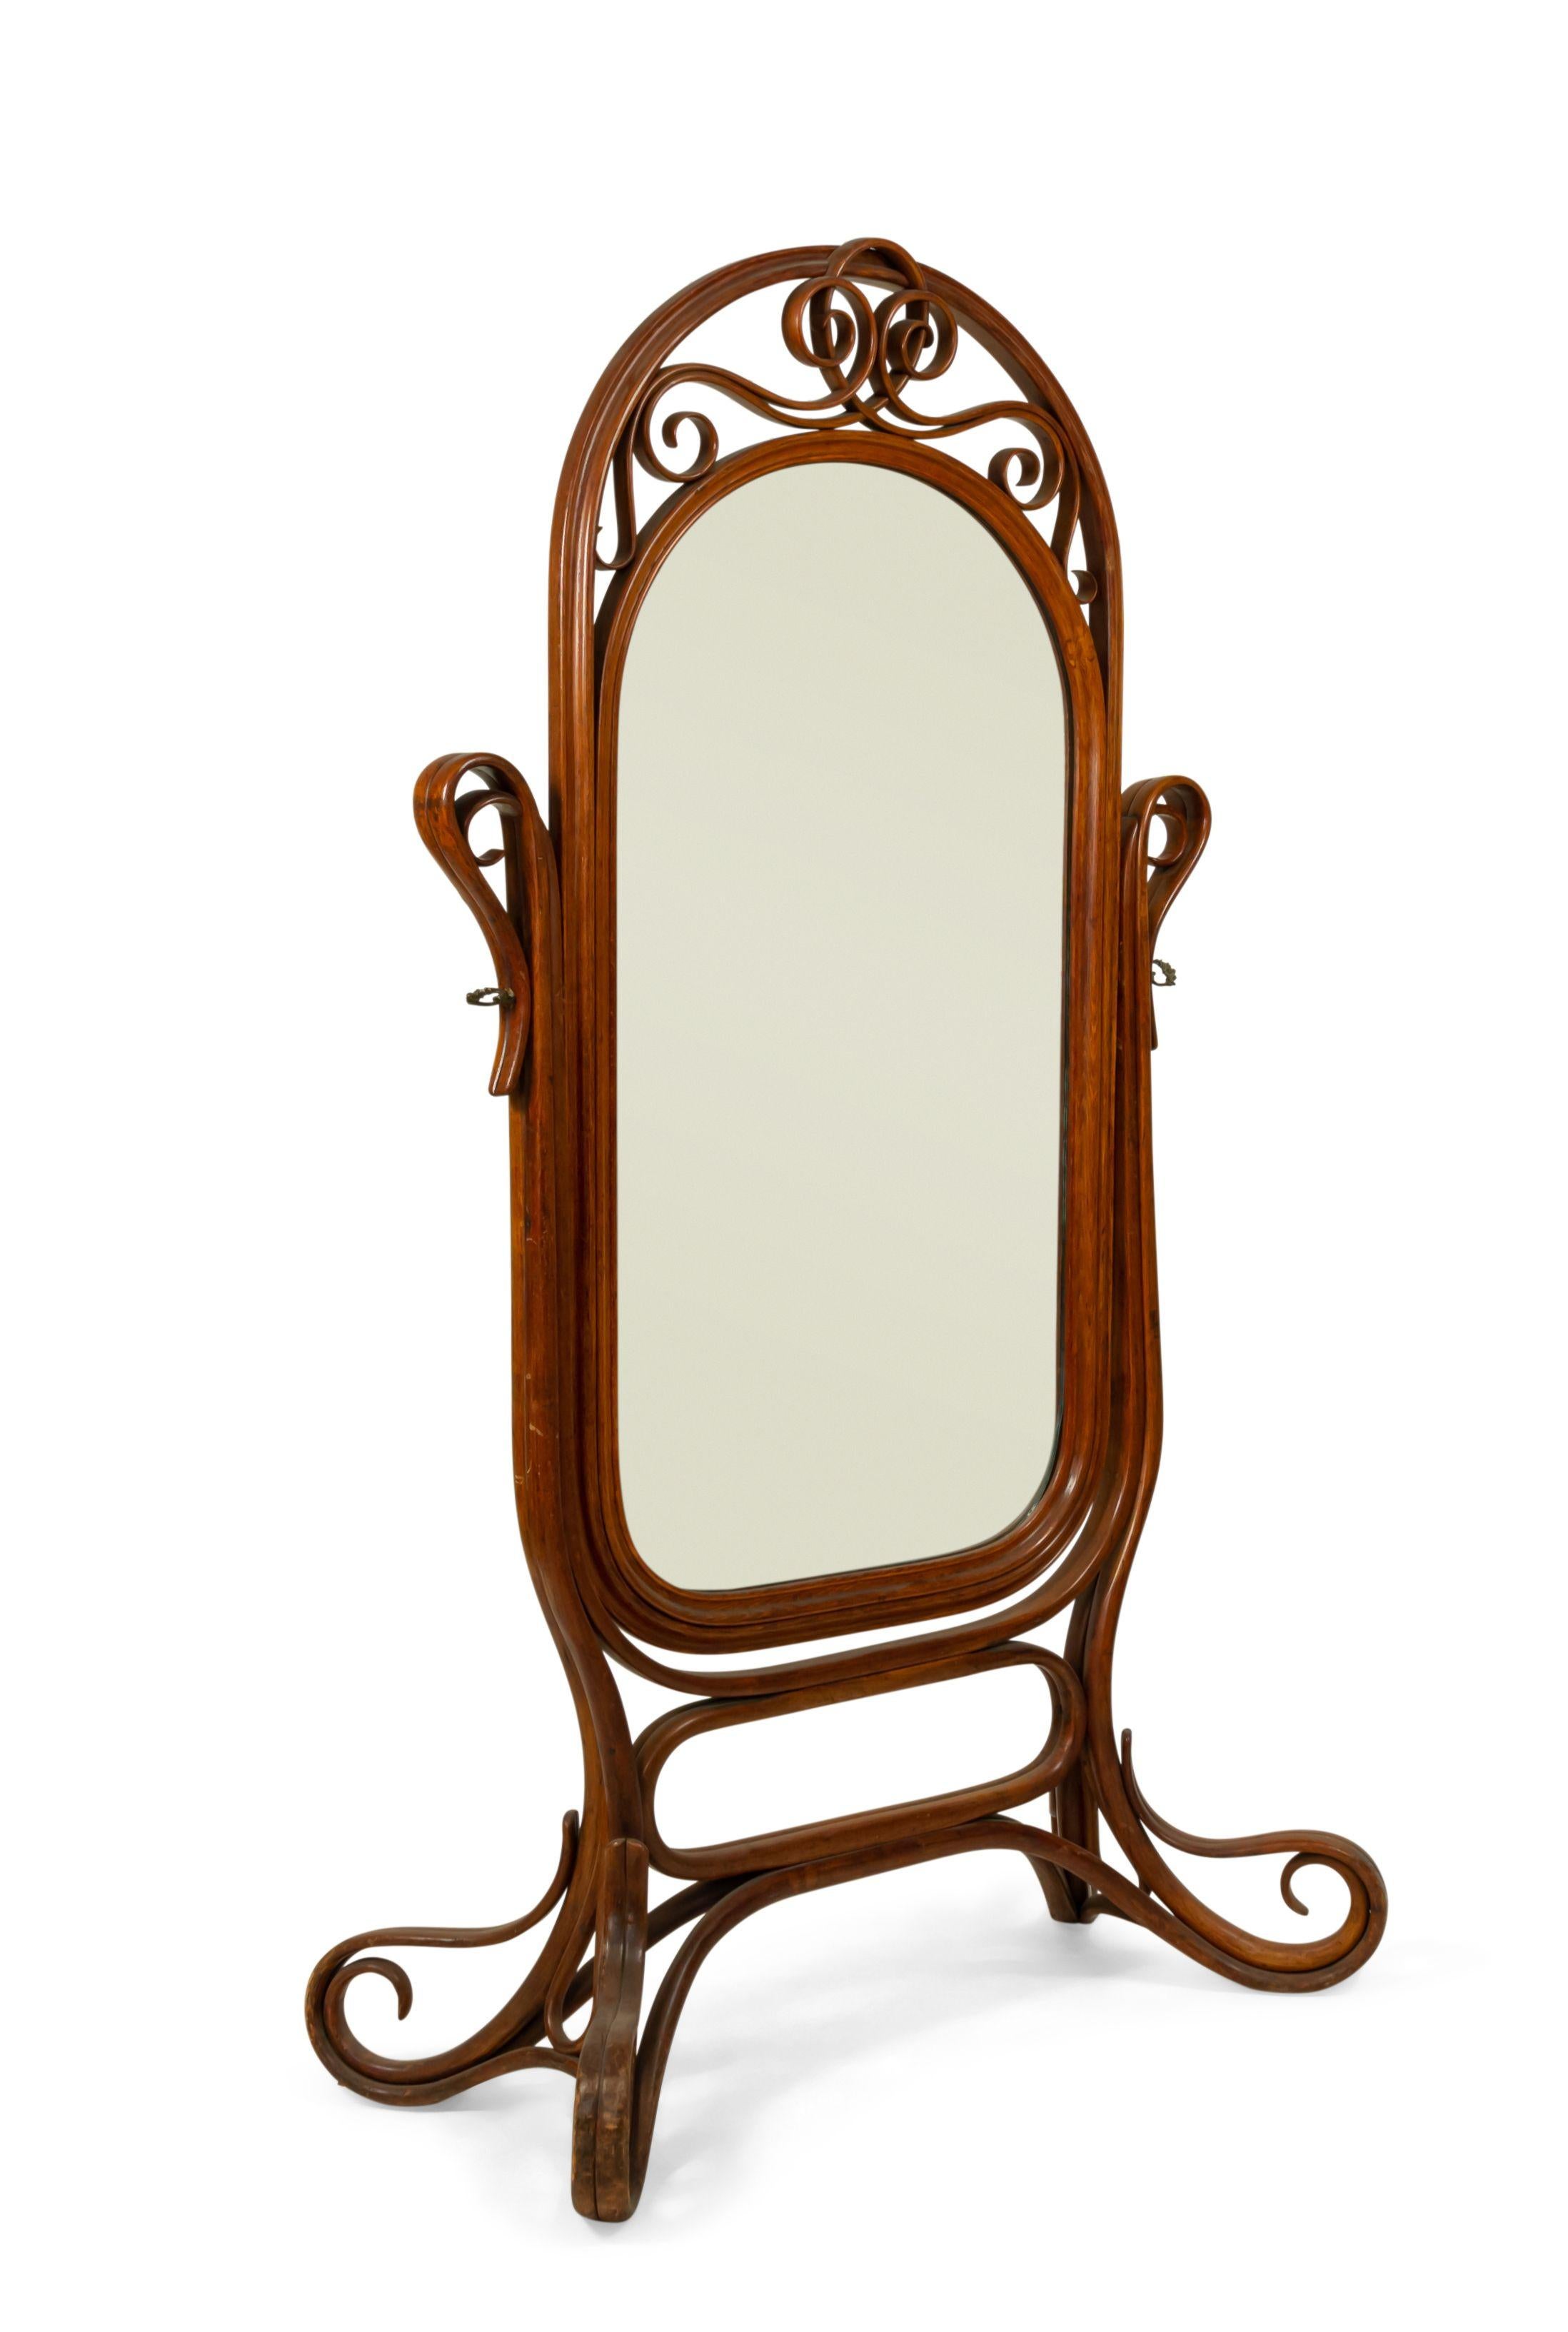 20th Century Bentwood Oak Cheval Mirror 'Manner of Michael Thonet' For Sale 4